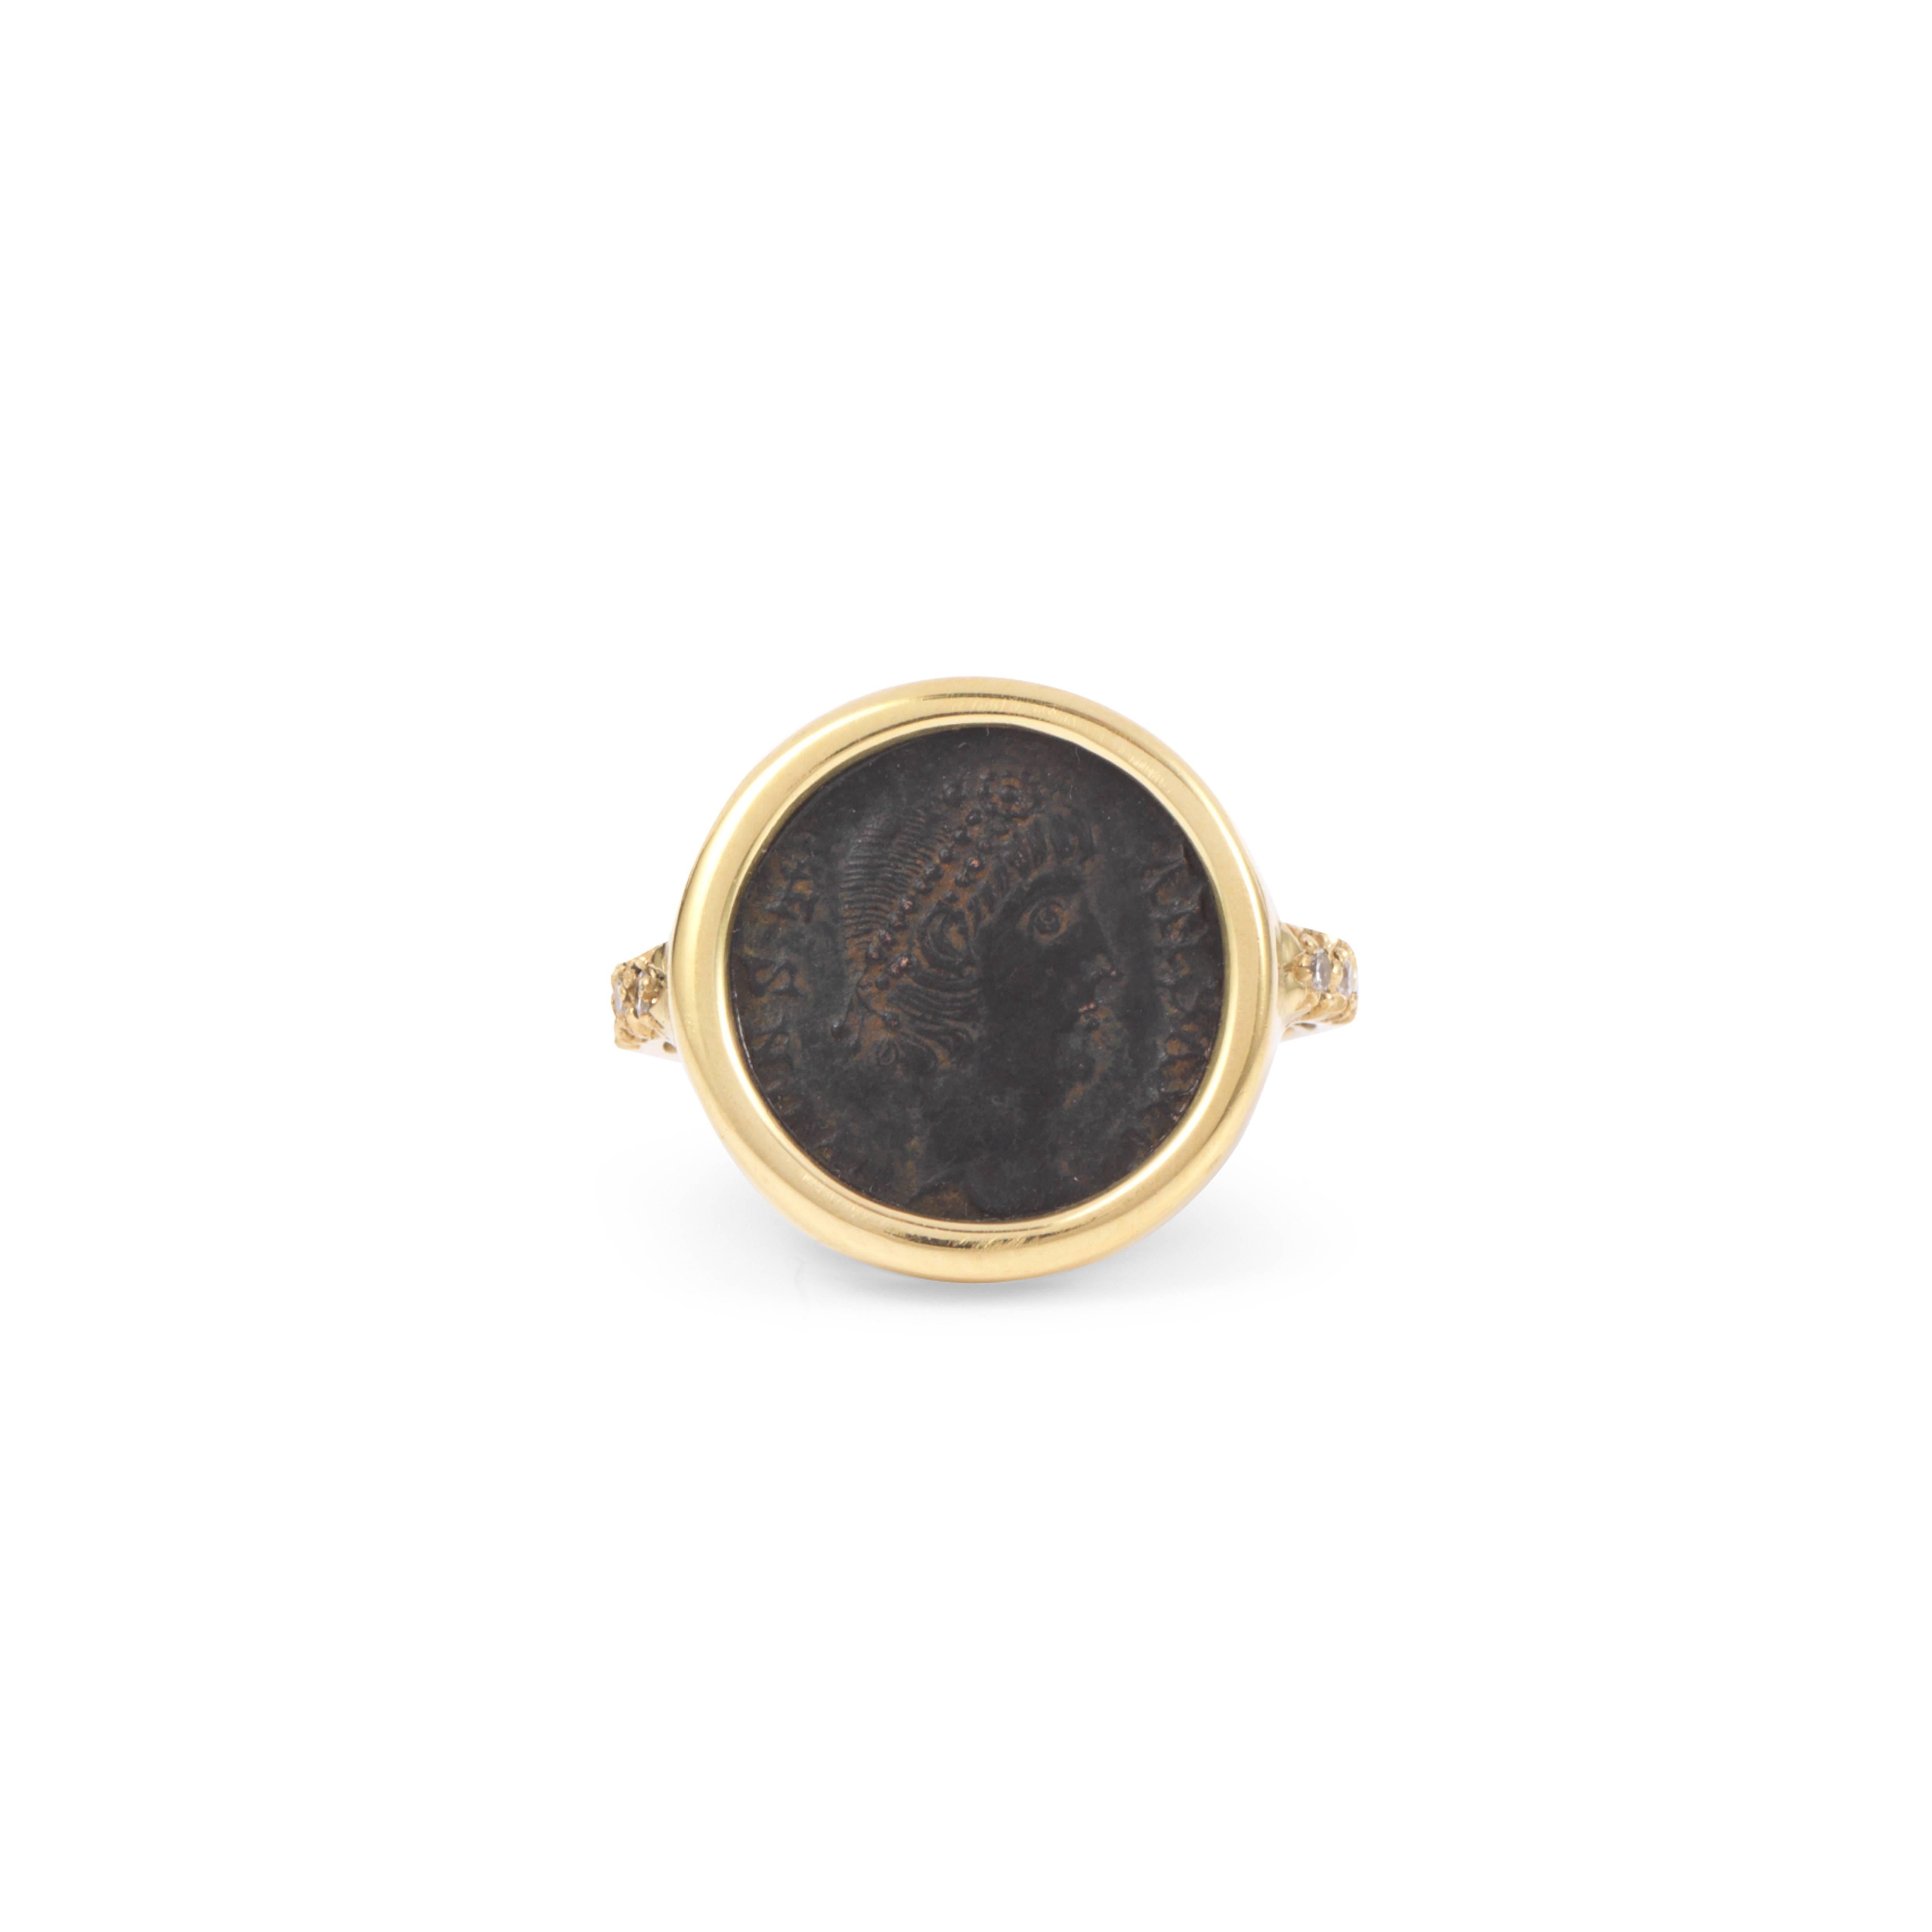 This DUBINI coin ring from the 'Empires' collection features an authentic Roman bronze coin set in 18K yellow gold with diamonds.

* Due to the unique process of hand carving coins in ancient times, there may be a few stylistic differences from the